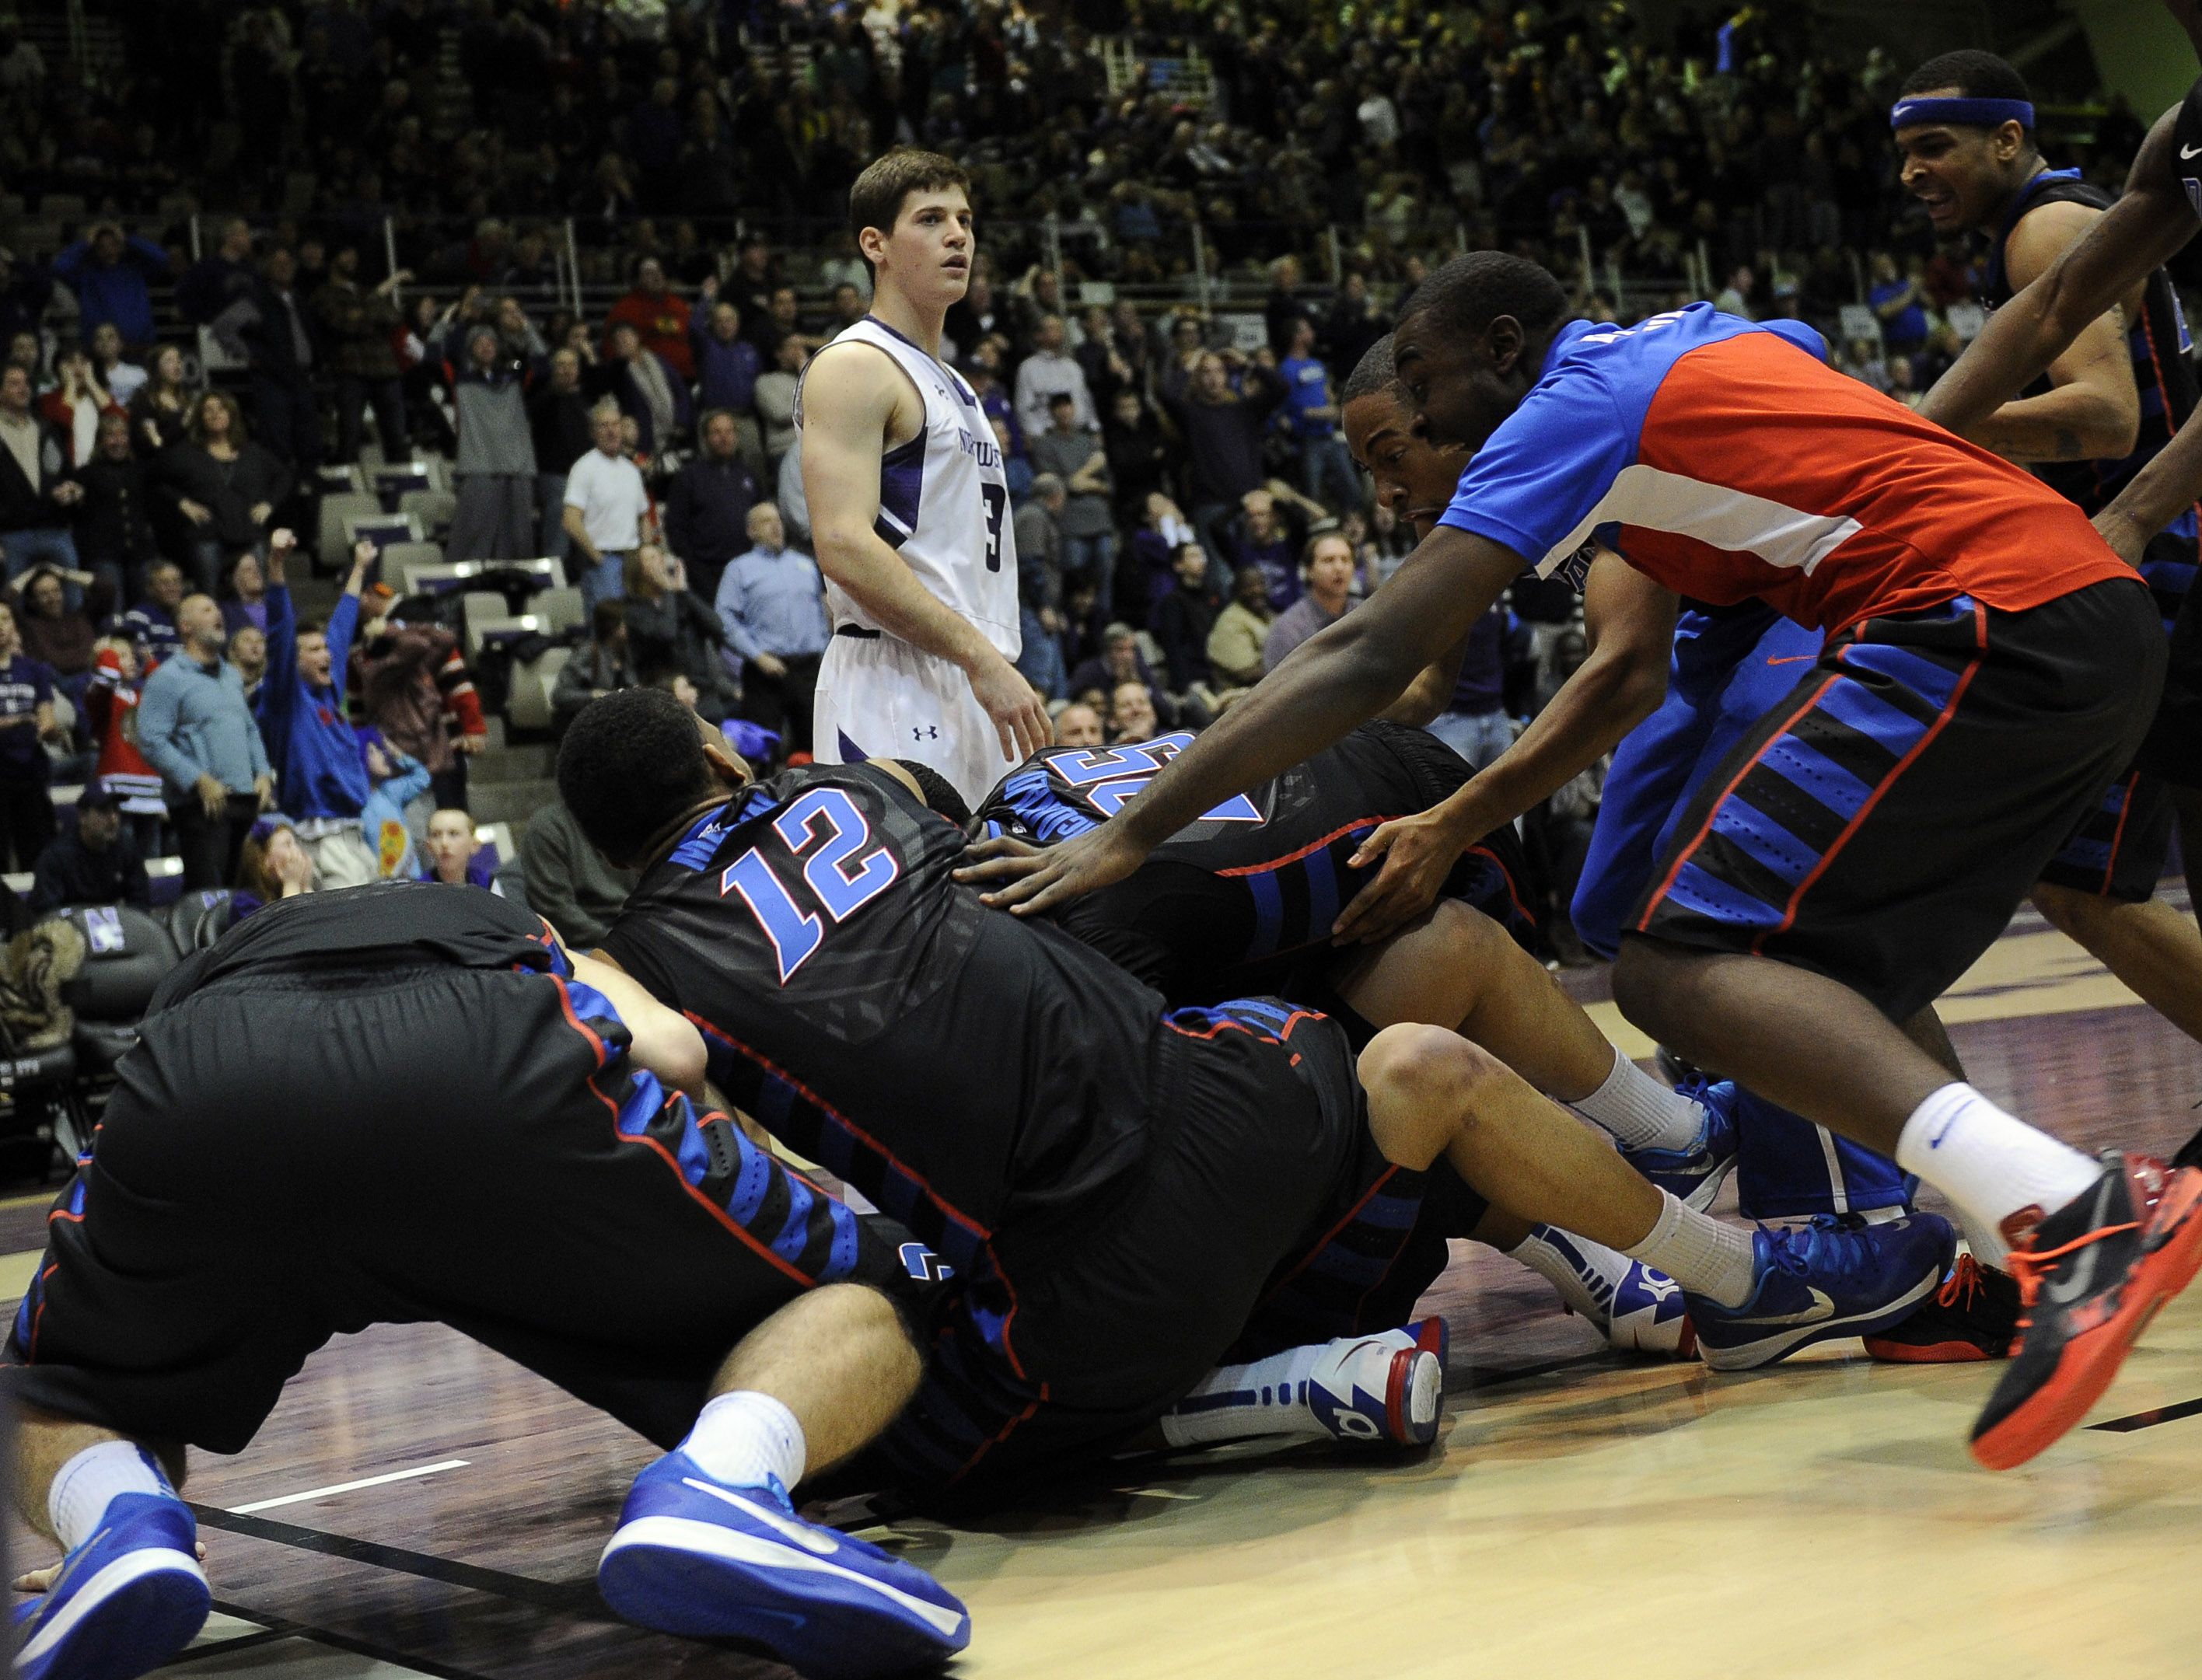 DePaul celebrates their buzzer beater win over Northwestern in their last matchup.